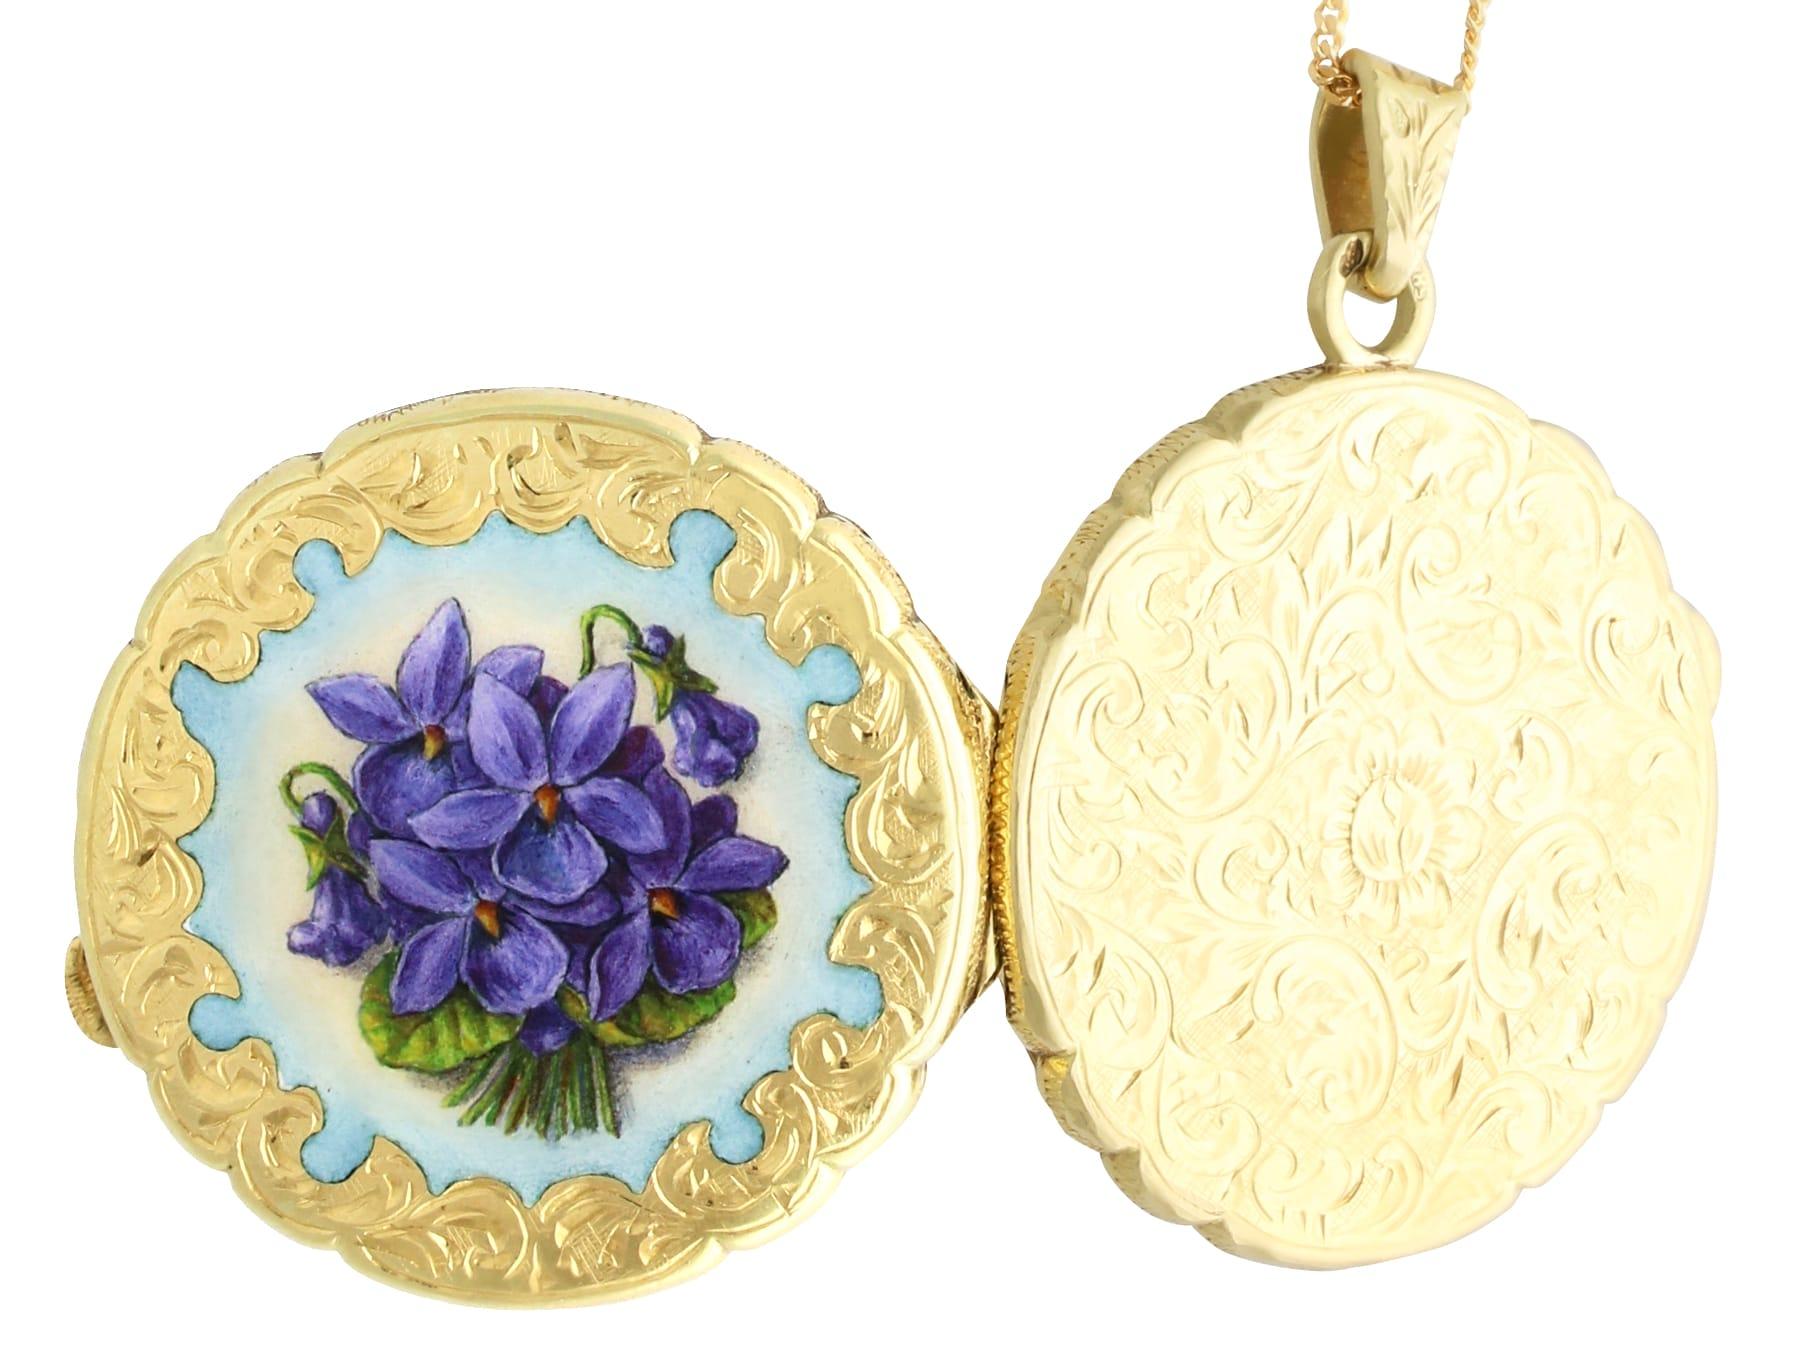 Antique 1930s Enamel and 14k Yellow Gold Pendant / Locket For Sale 2